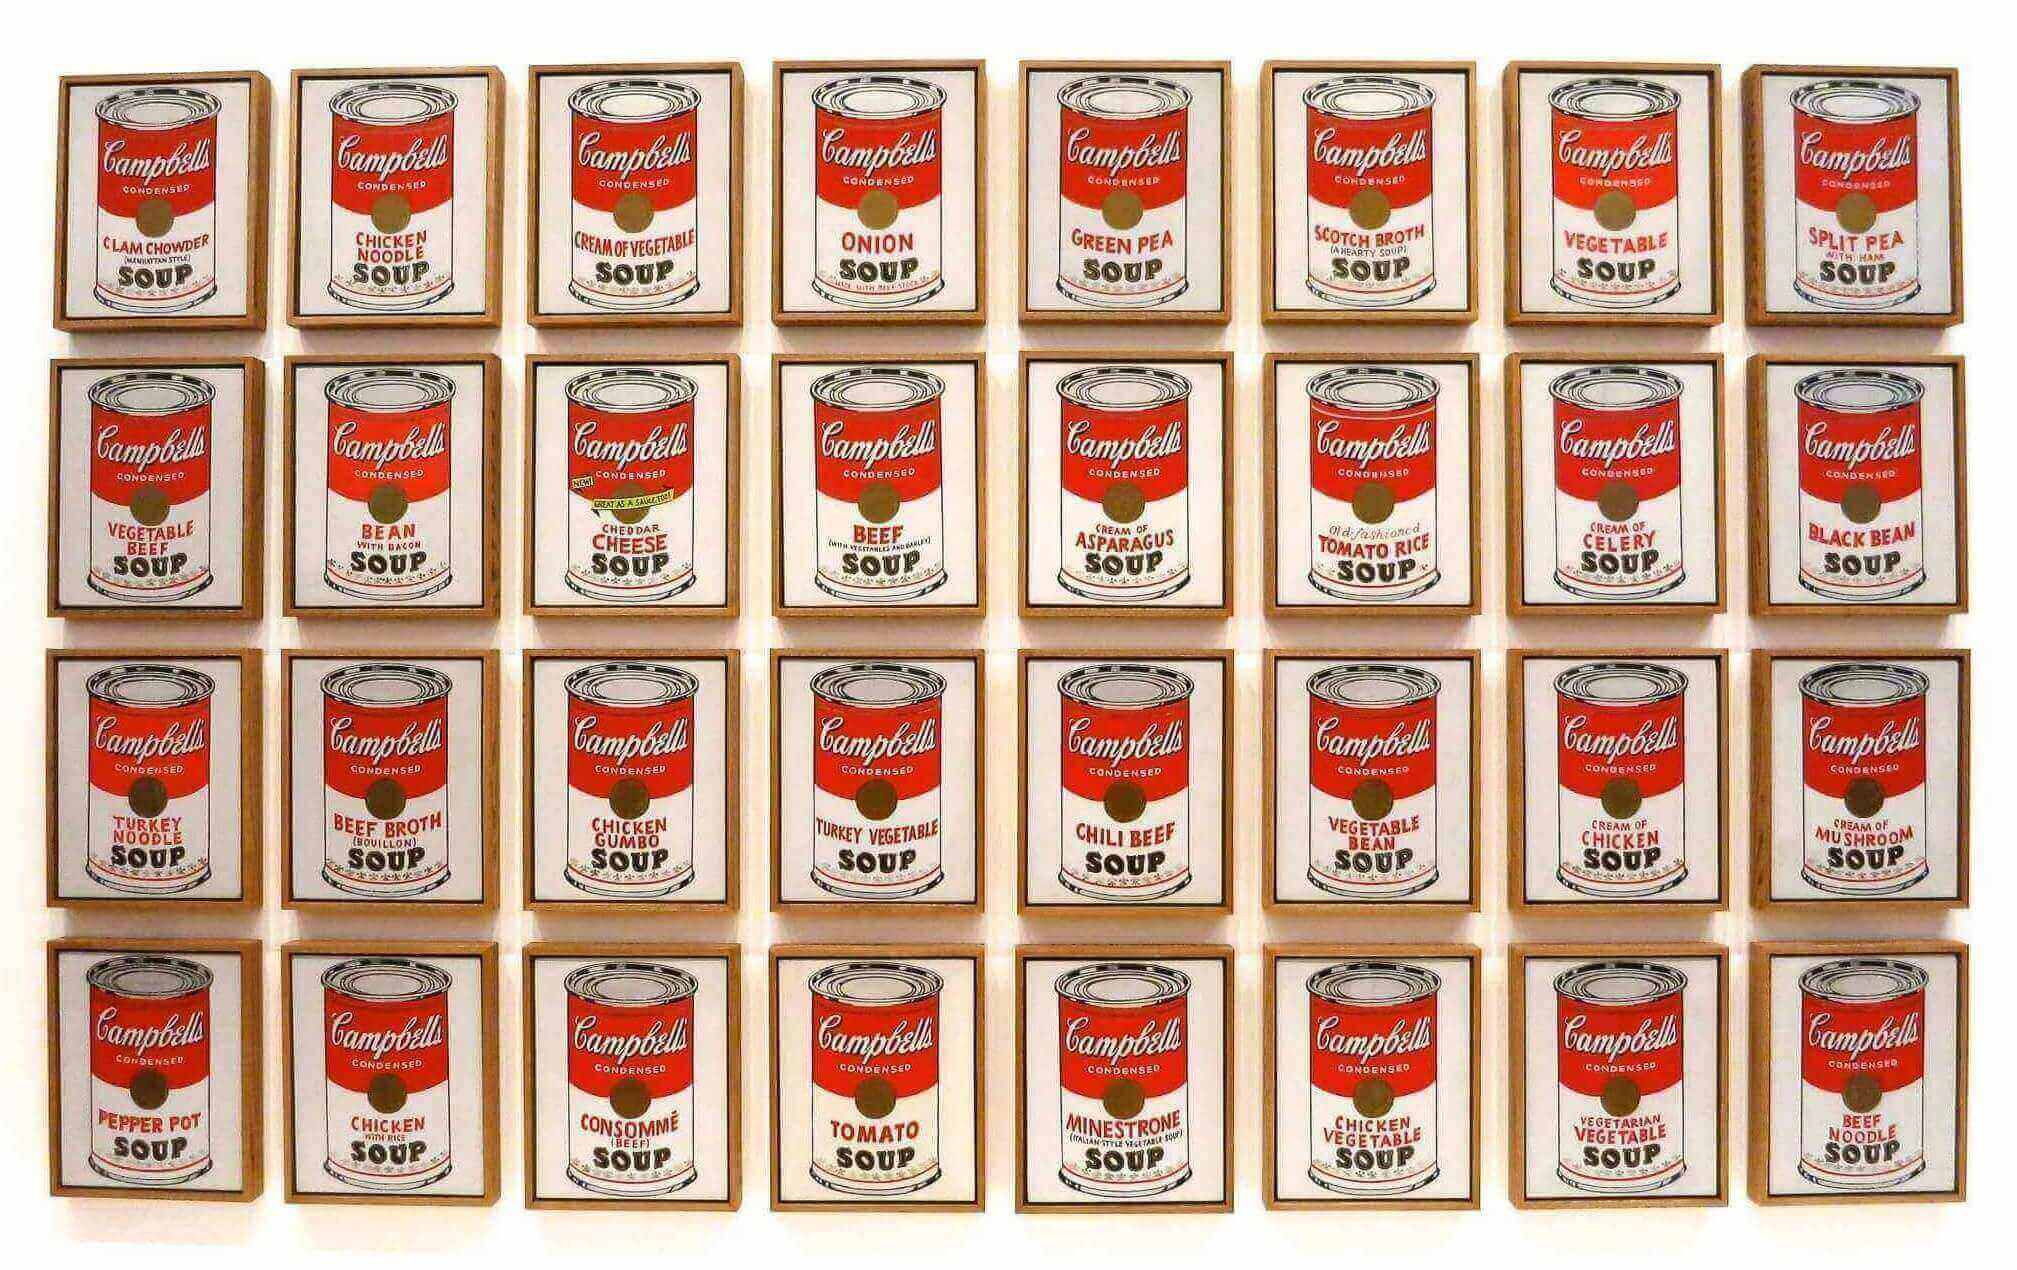 Andy Warhol. Campbell’s Soup Cans. MoMA